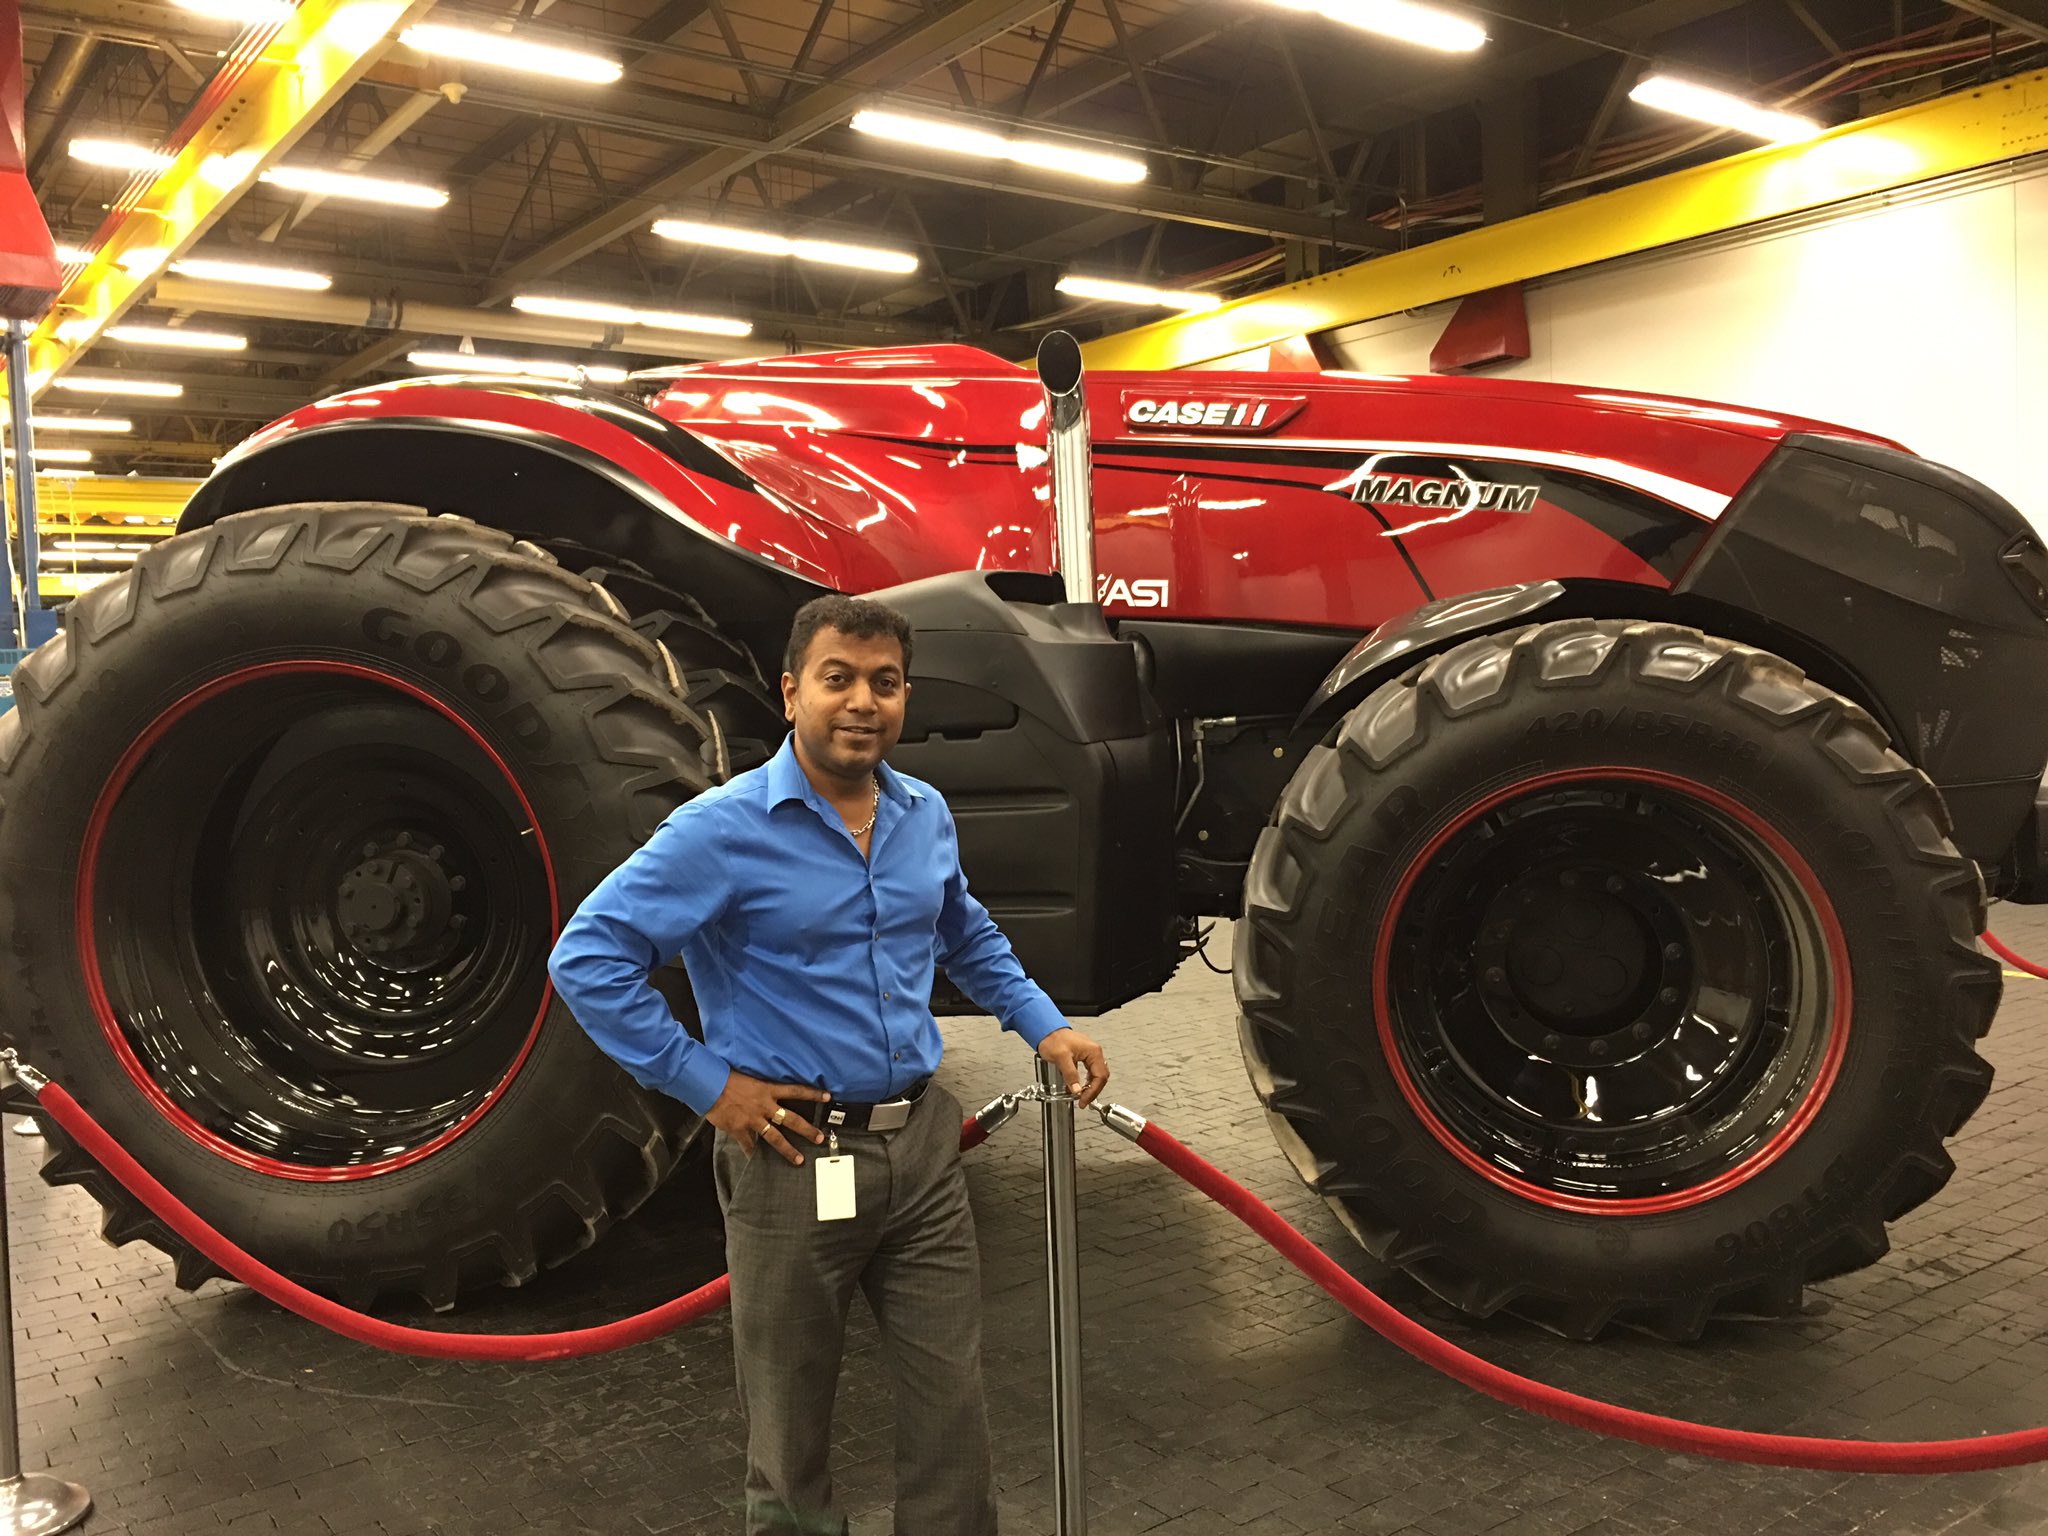 Huxley Joseph on Twitter: "With the self-driving autonomous concept tractor  #selfdriving #tractor #cnh #TheDayTheFarmChanged shown at 2016  #farmprogress show in Iowa https://t.co/QdoSw4oRyx" / Twitter